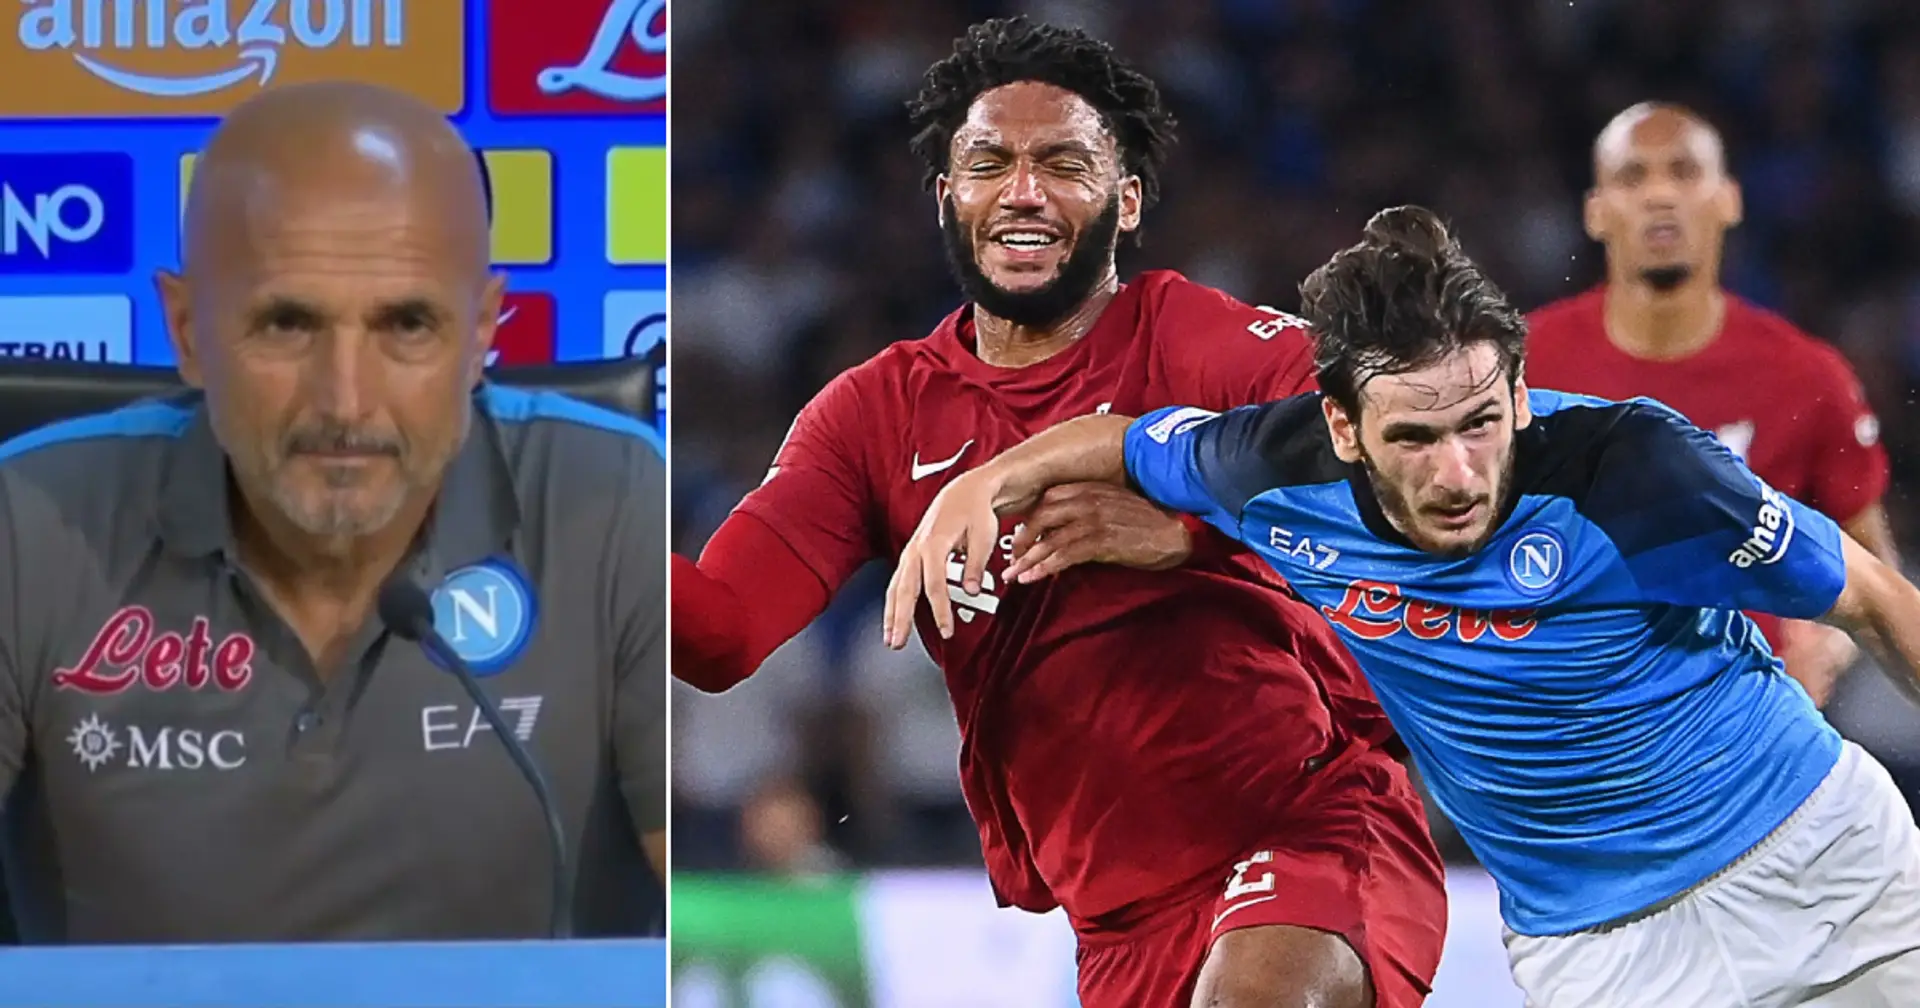 'Spectacle is guaranteed': Napoli boss Spalletti looks forward to facing Liverpool in top-of-the-table clash in Champions League